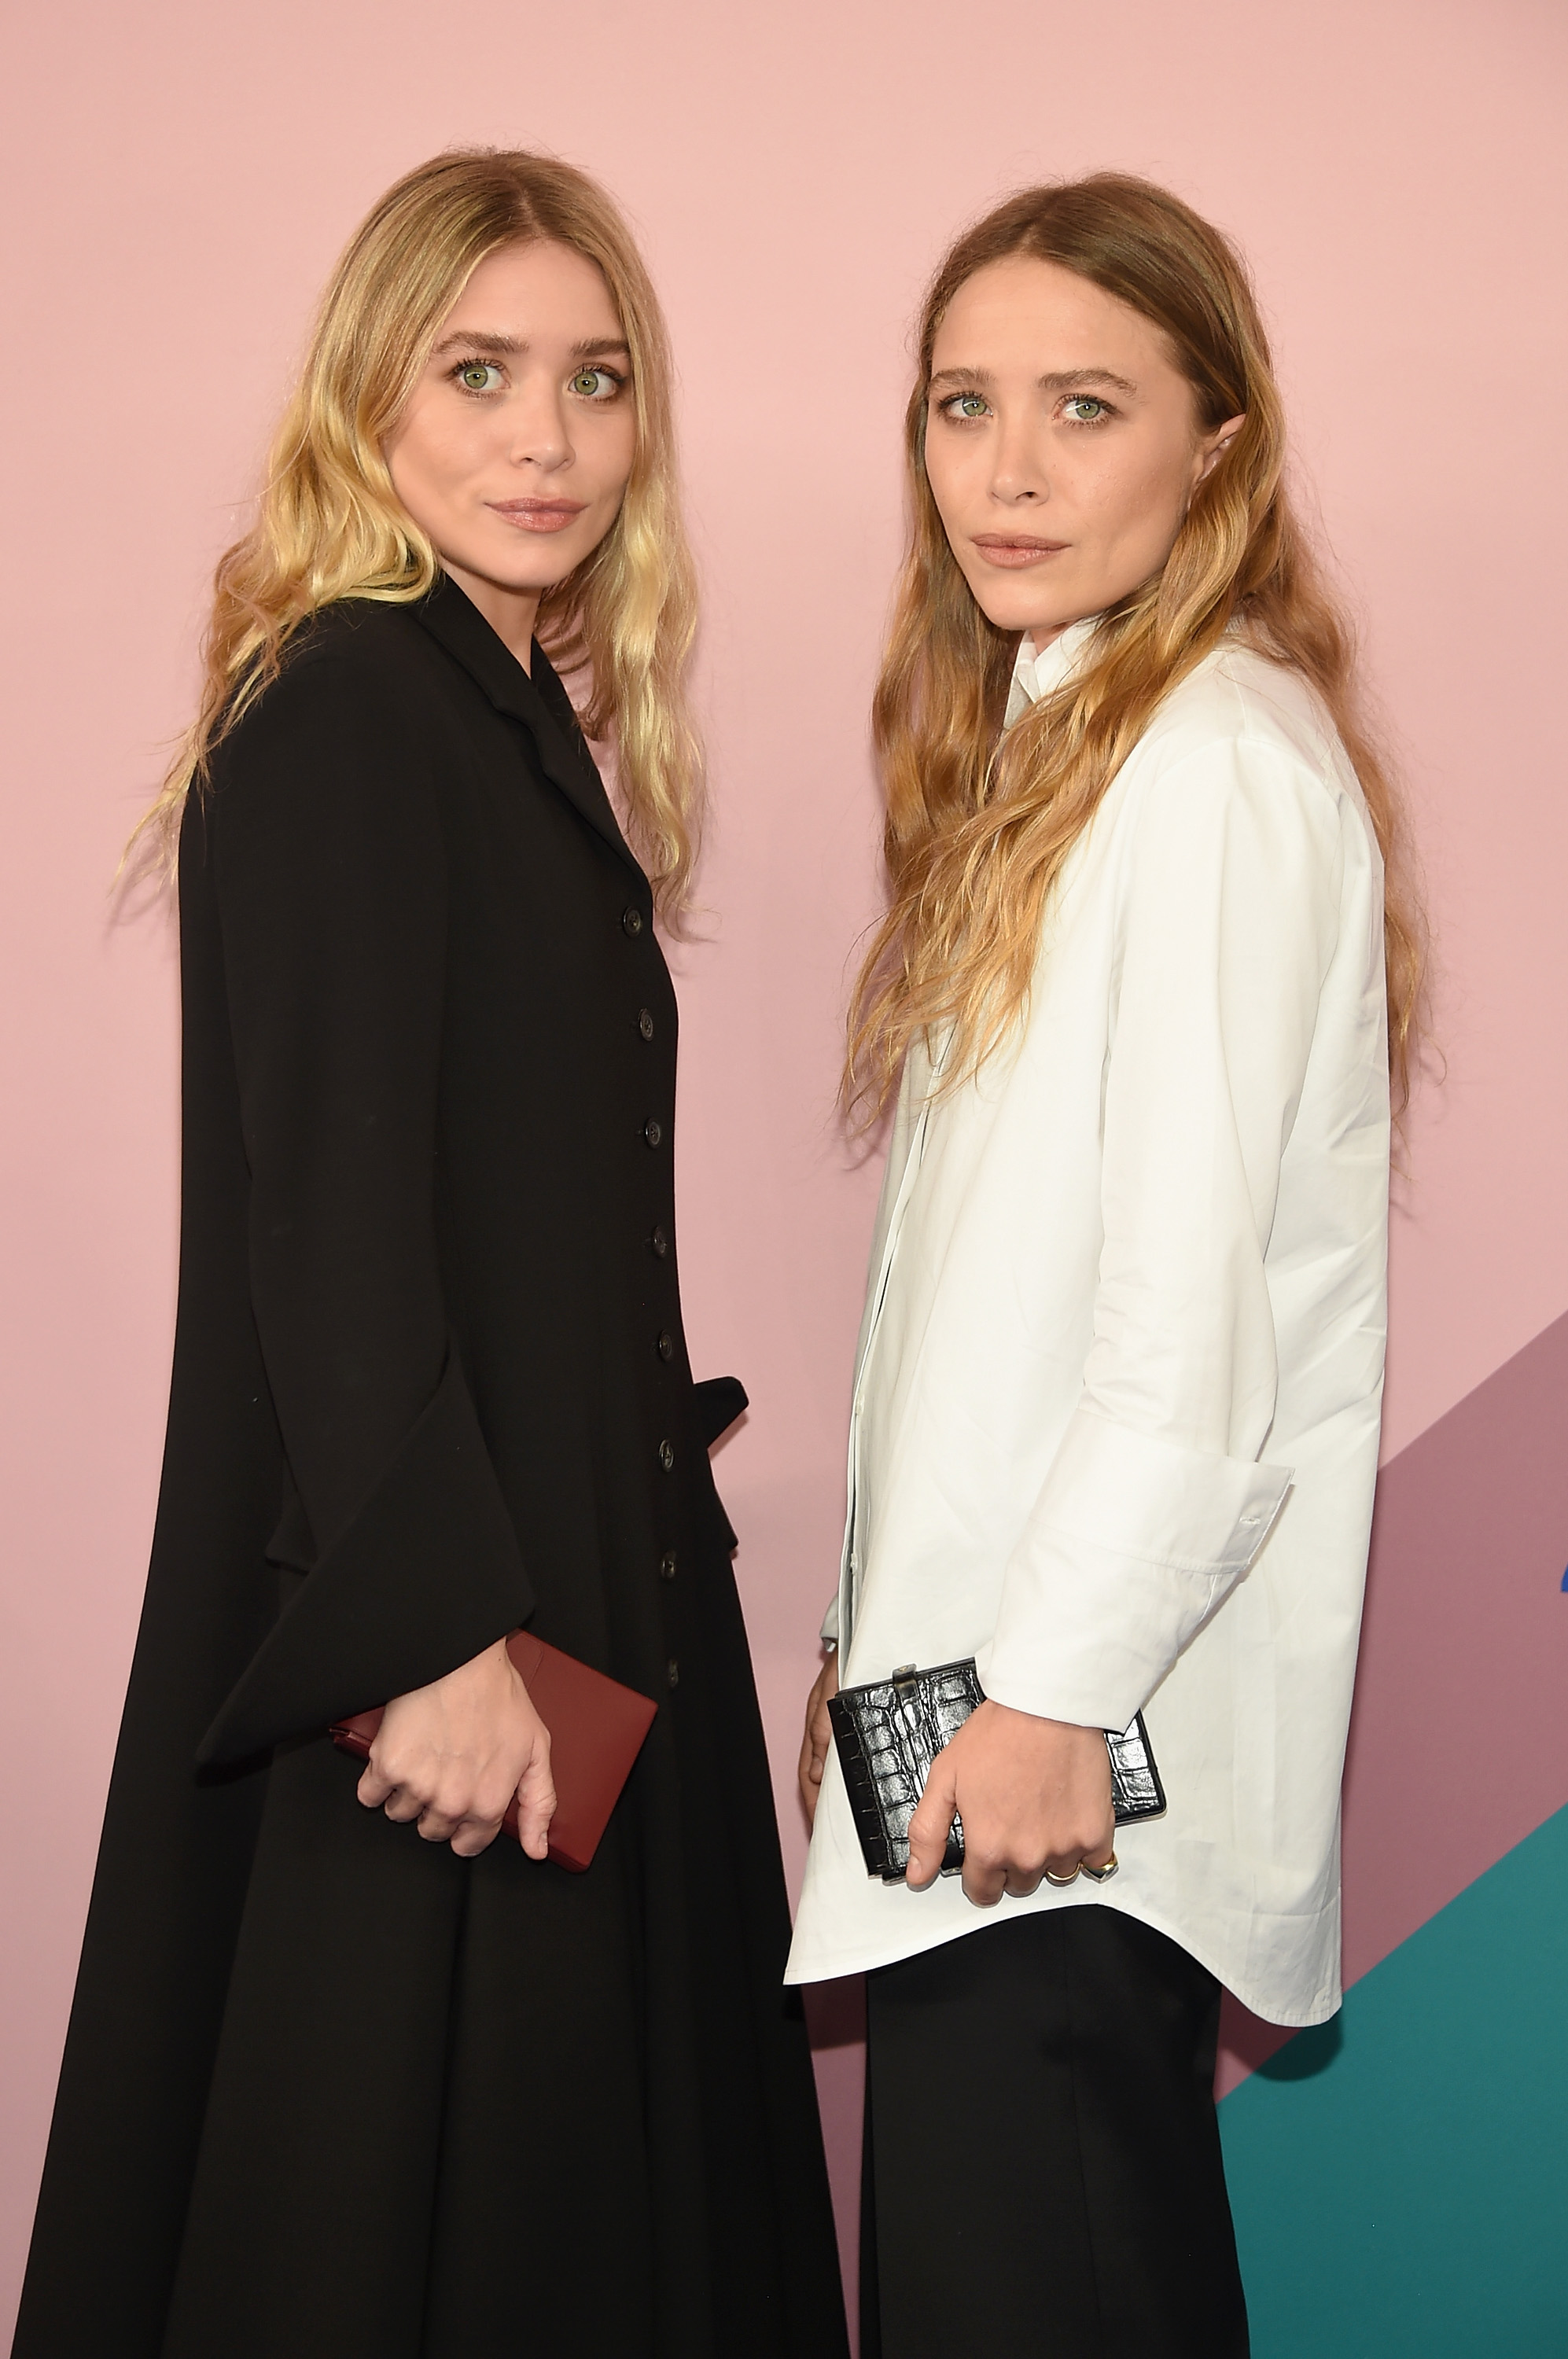 The Row, the Olsen twins' luxury brand worn by Jonah Hill and Zoe